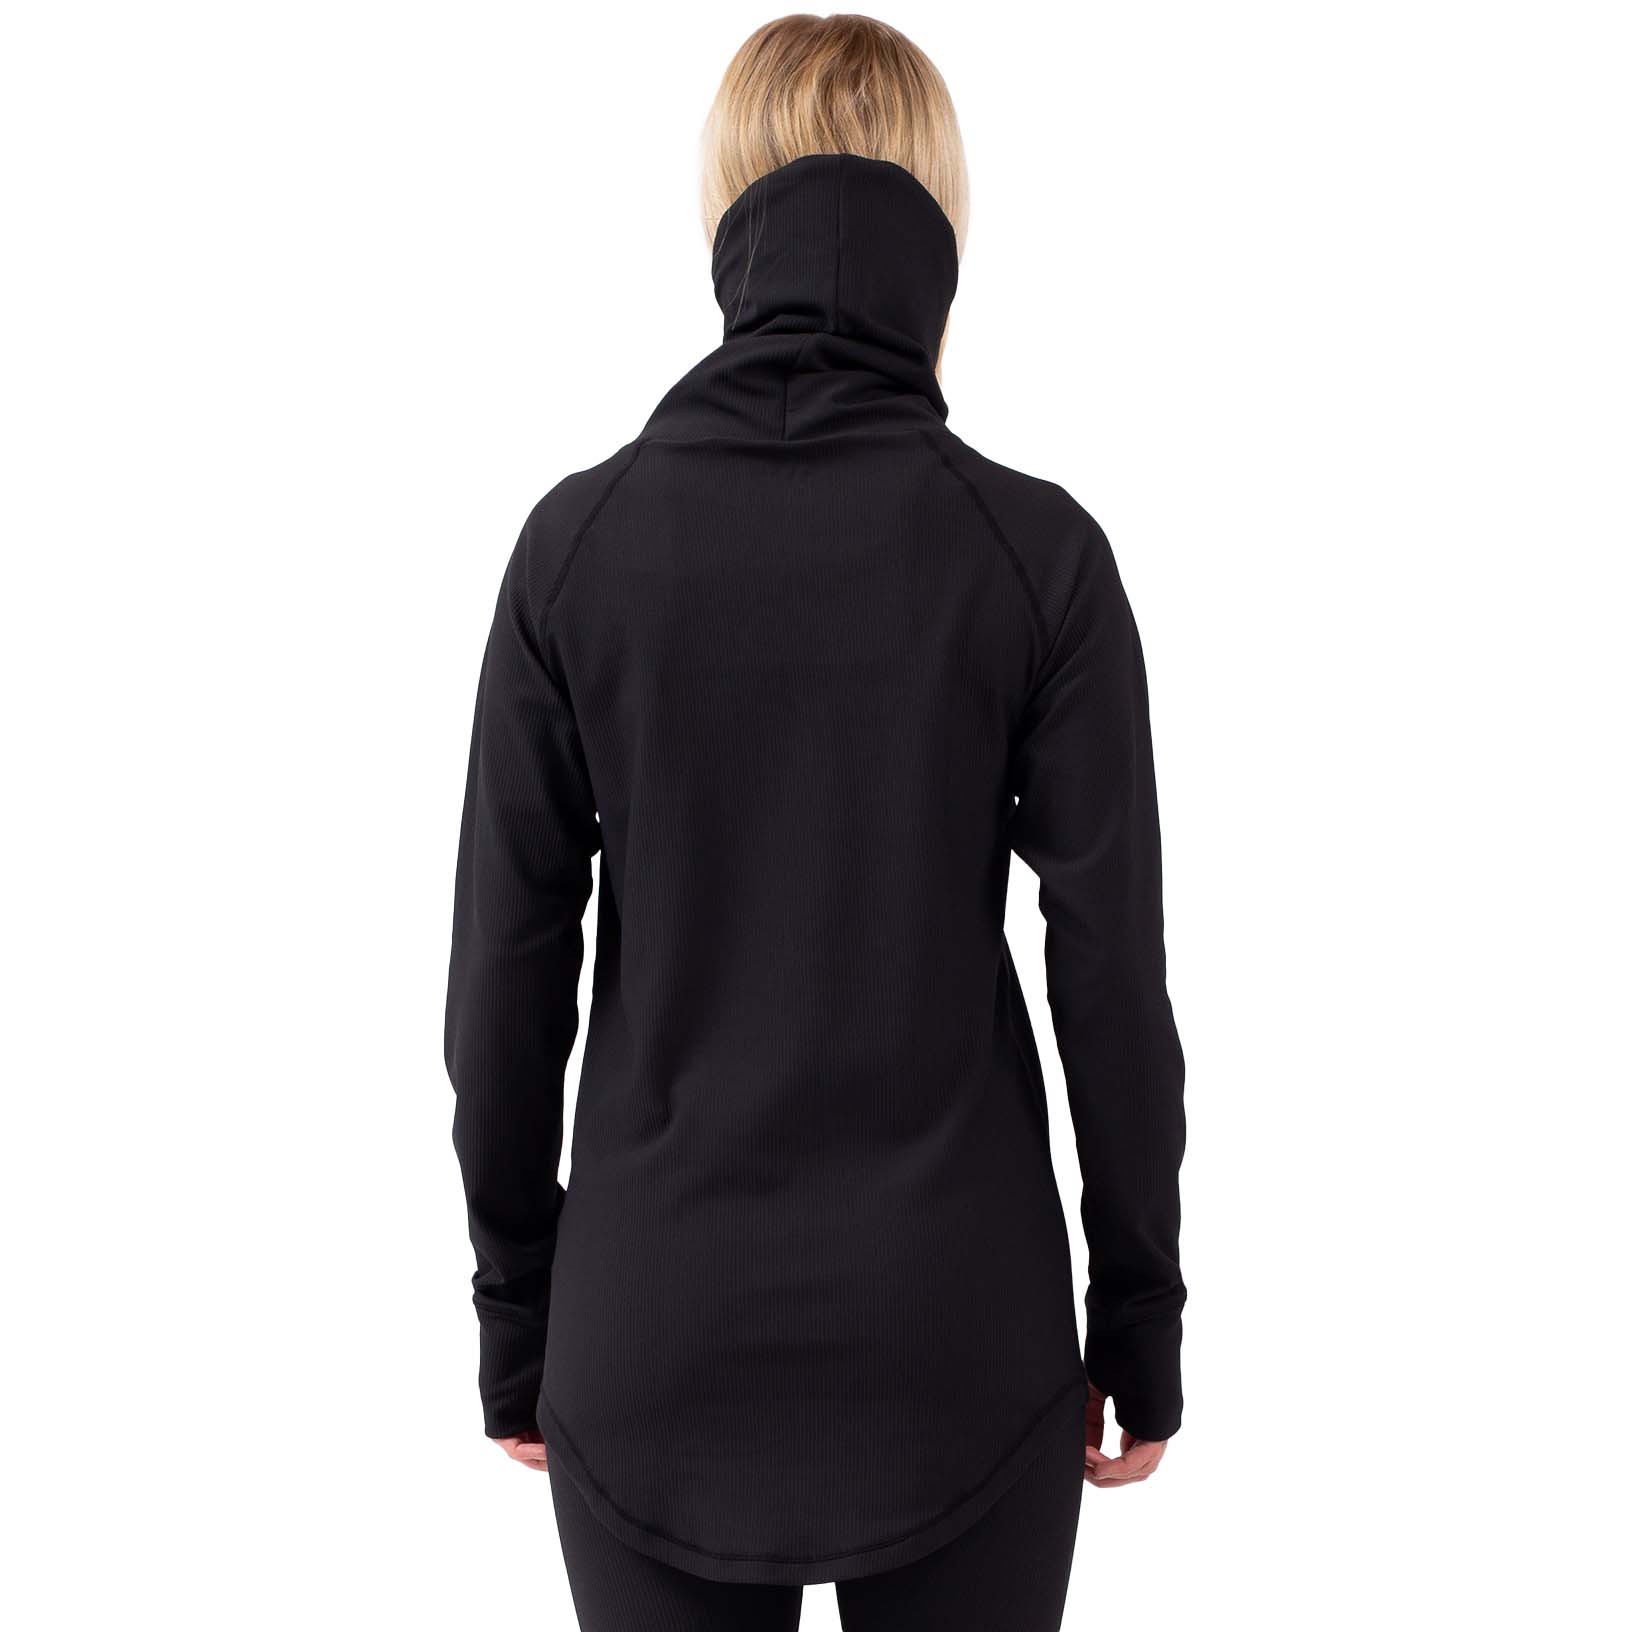 Eivy Icecold Gaiter Rib Top Women's Thermal Baselayer 